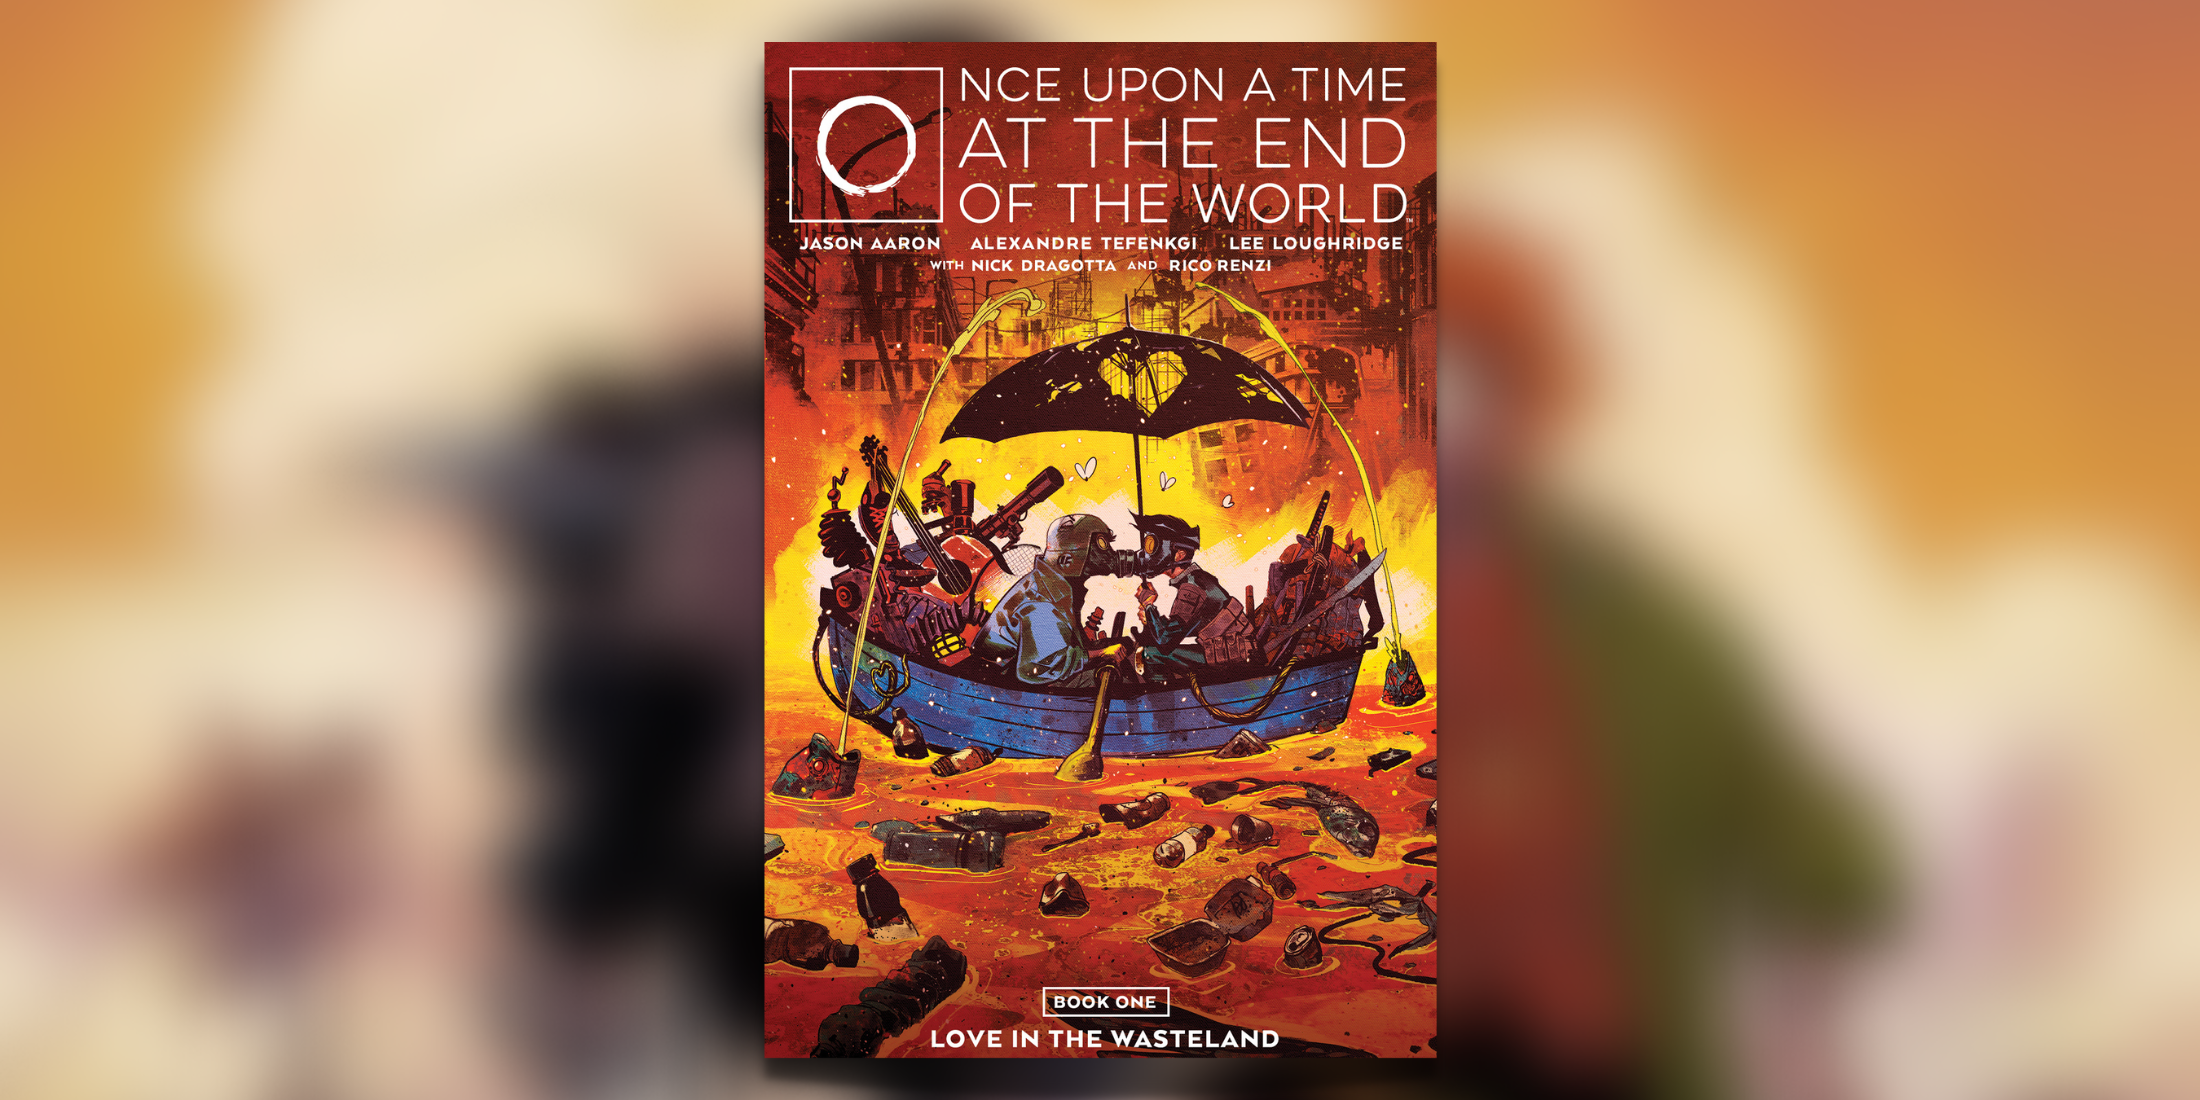 Once Upon A Time At The End of the World Volume One: Love in the Wasteland